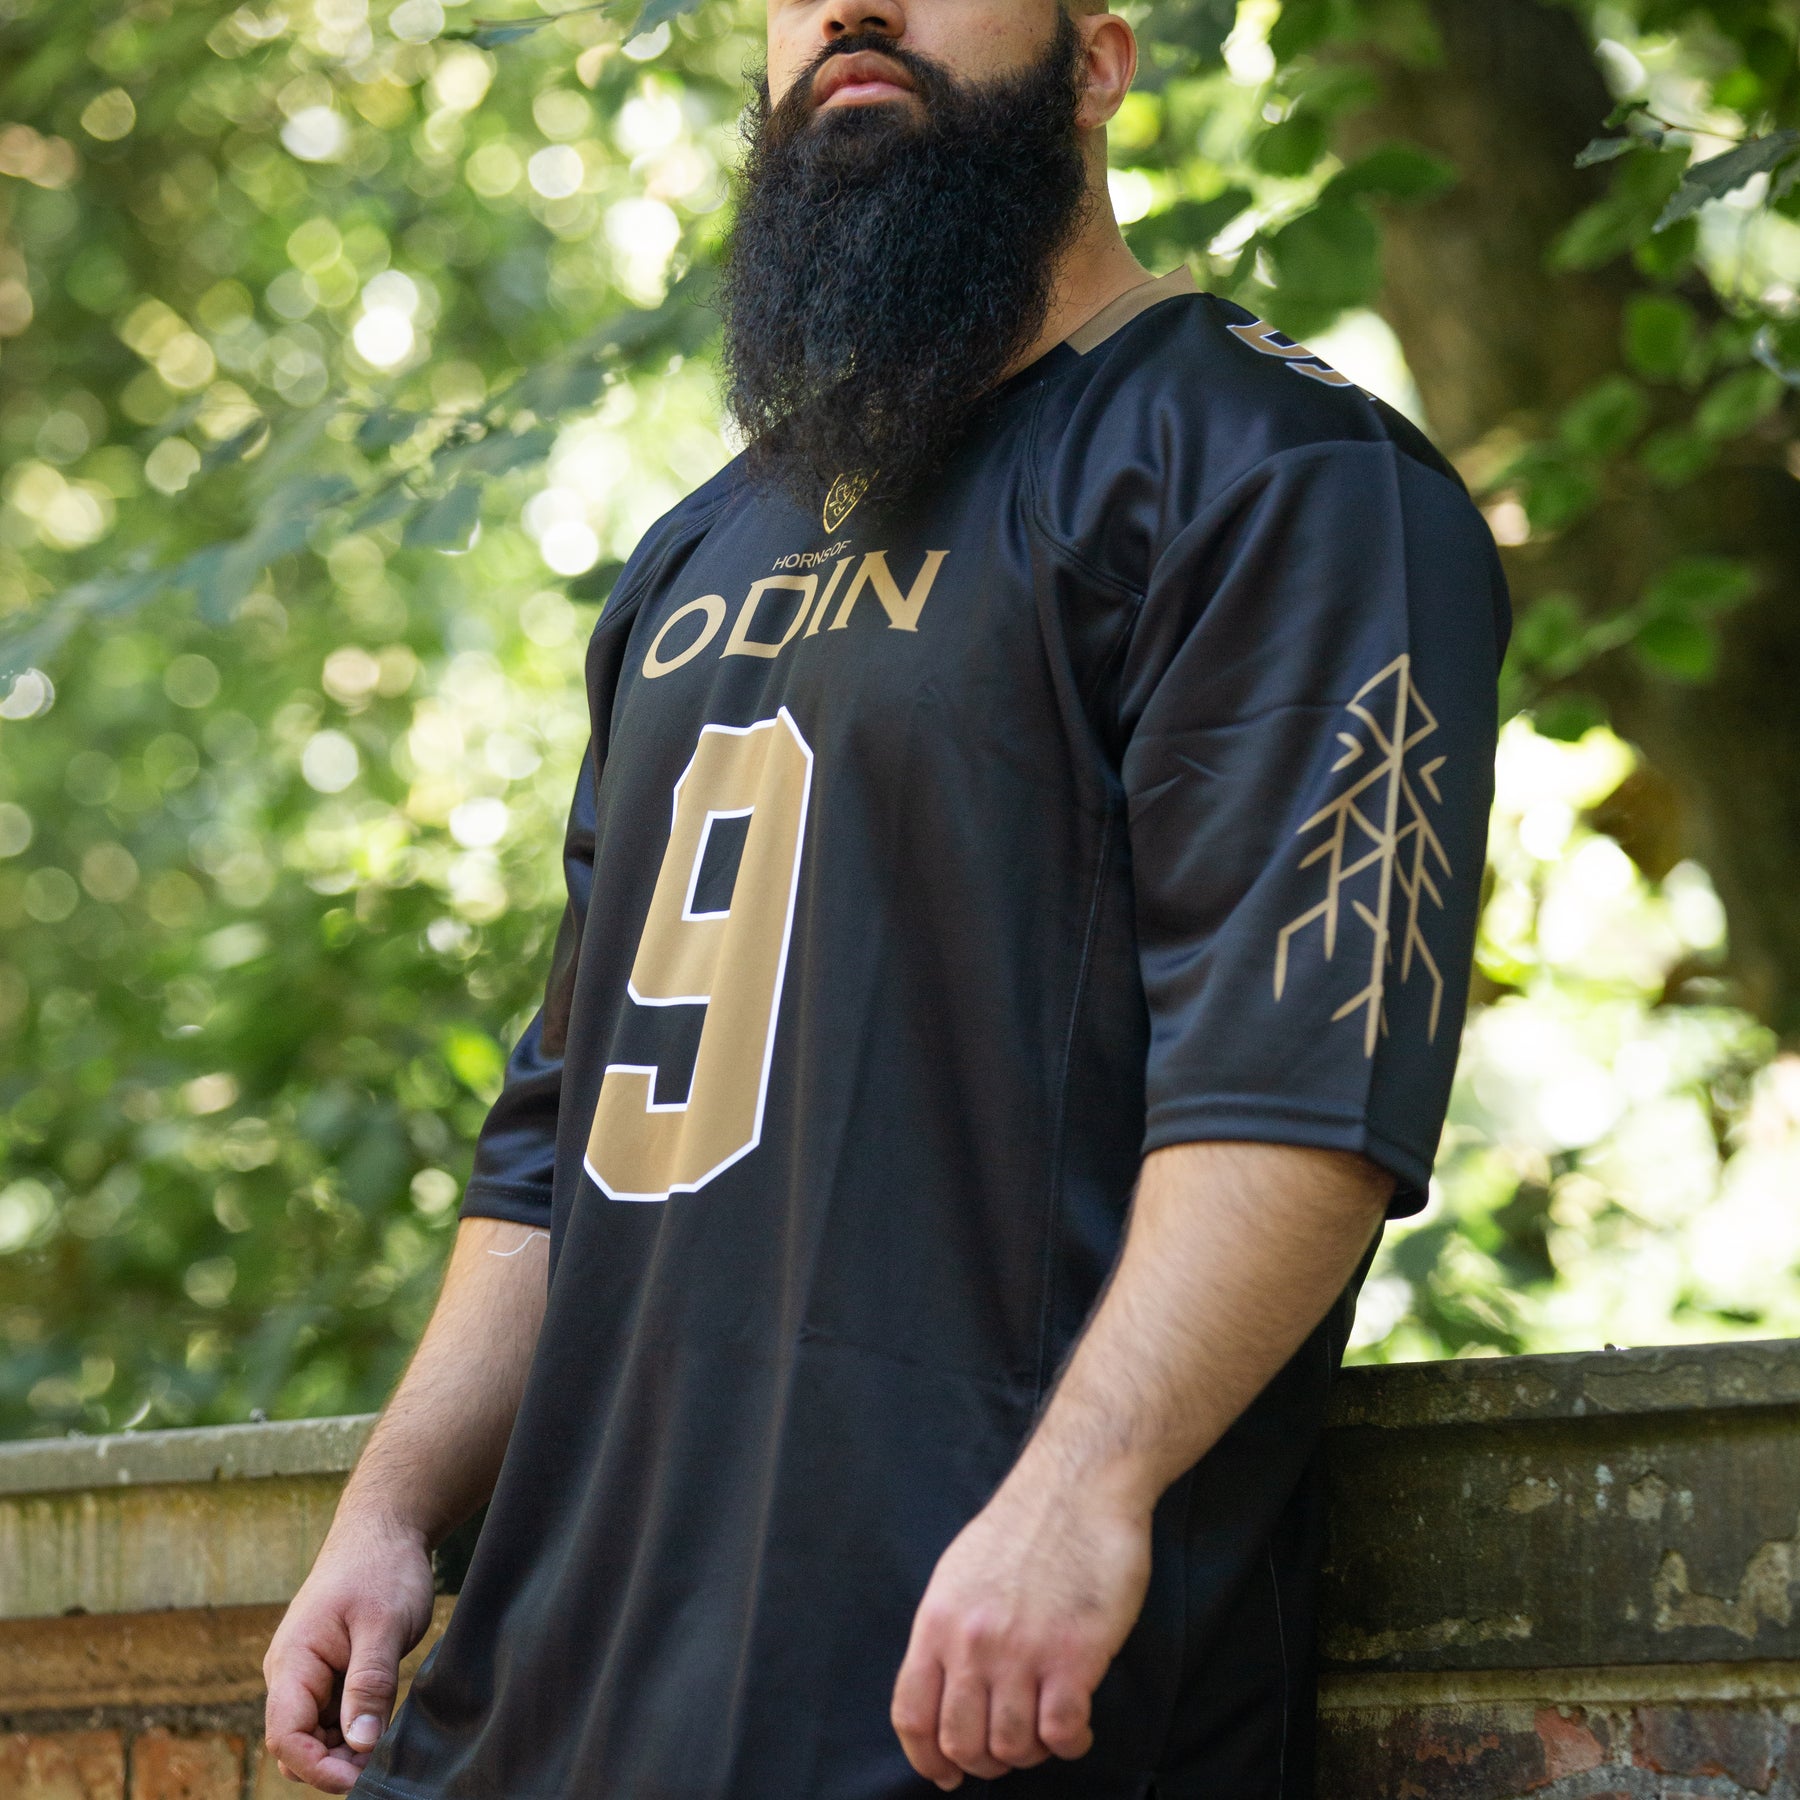  Black And Gold Jersey